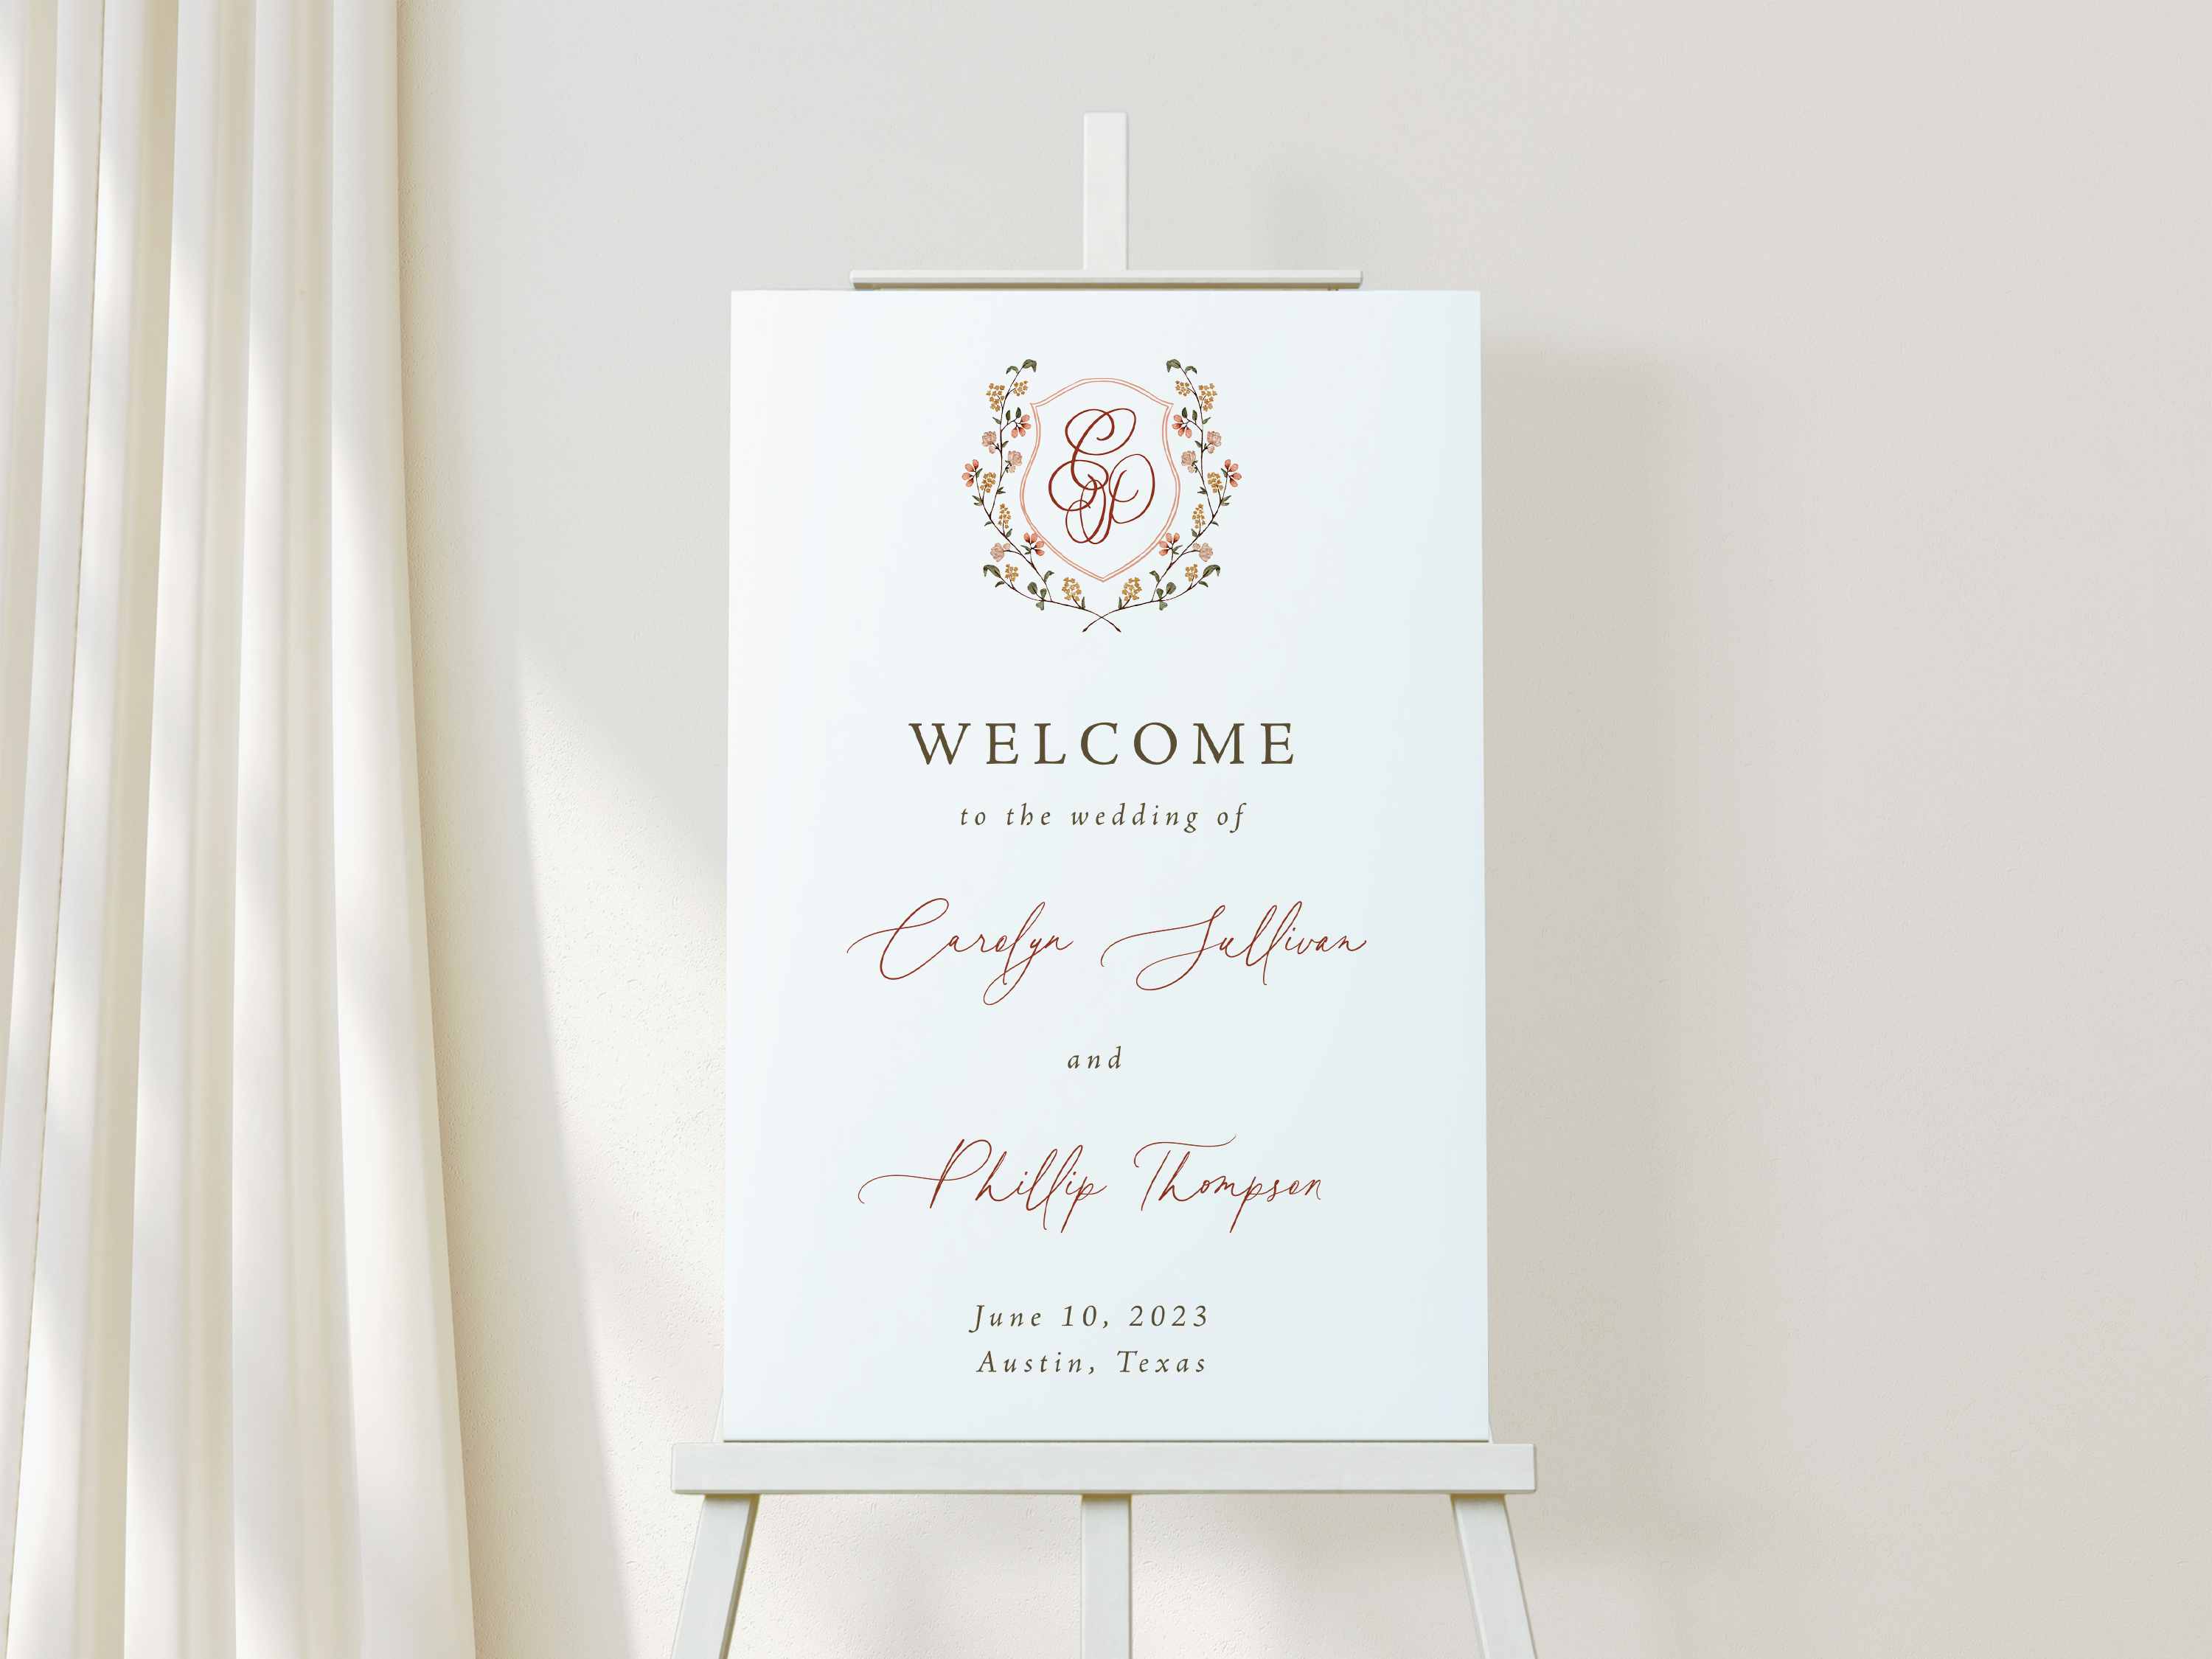 tatiana coral monogram crest large format welcome sign